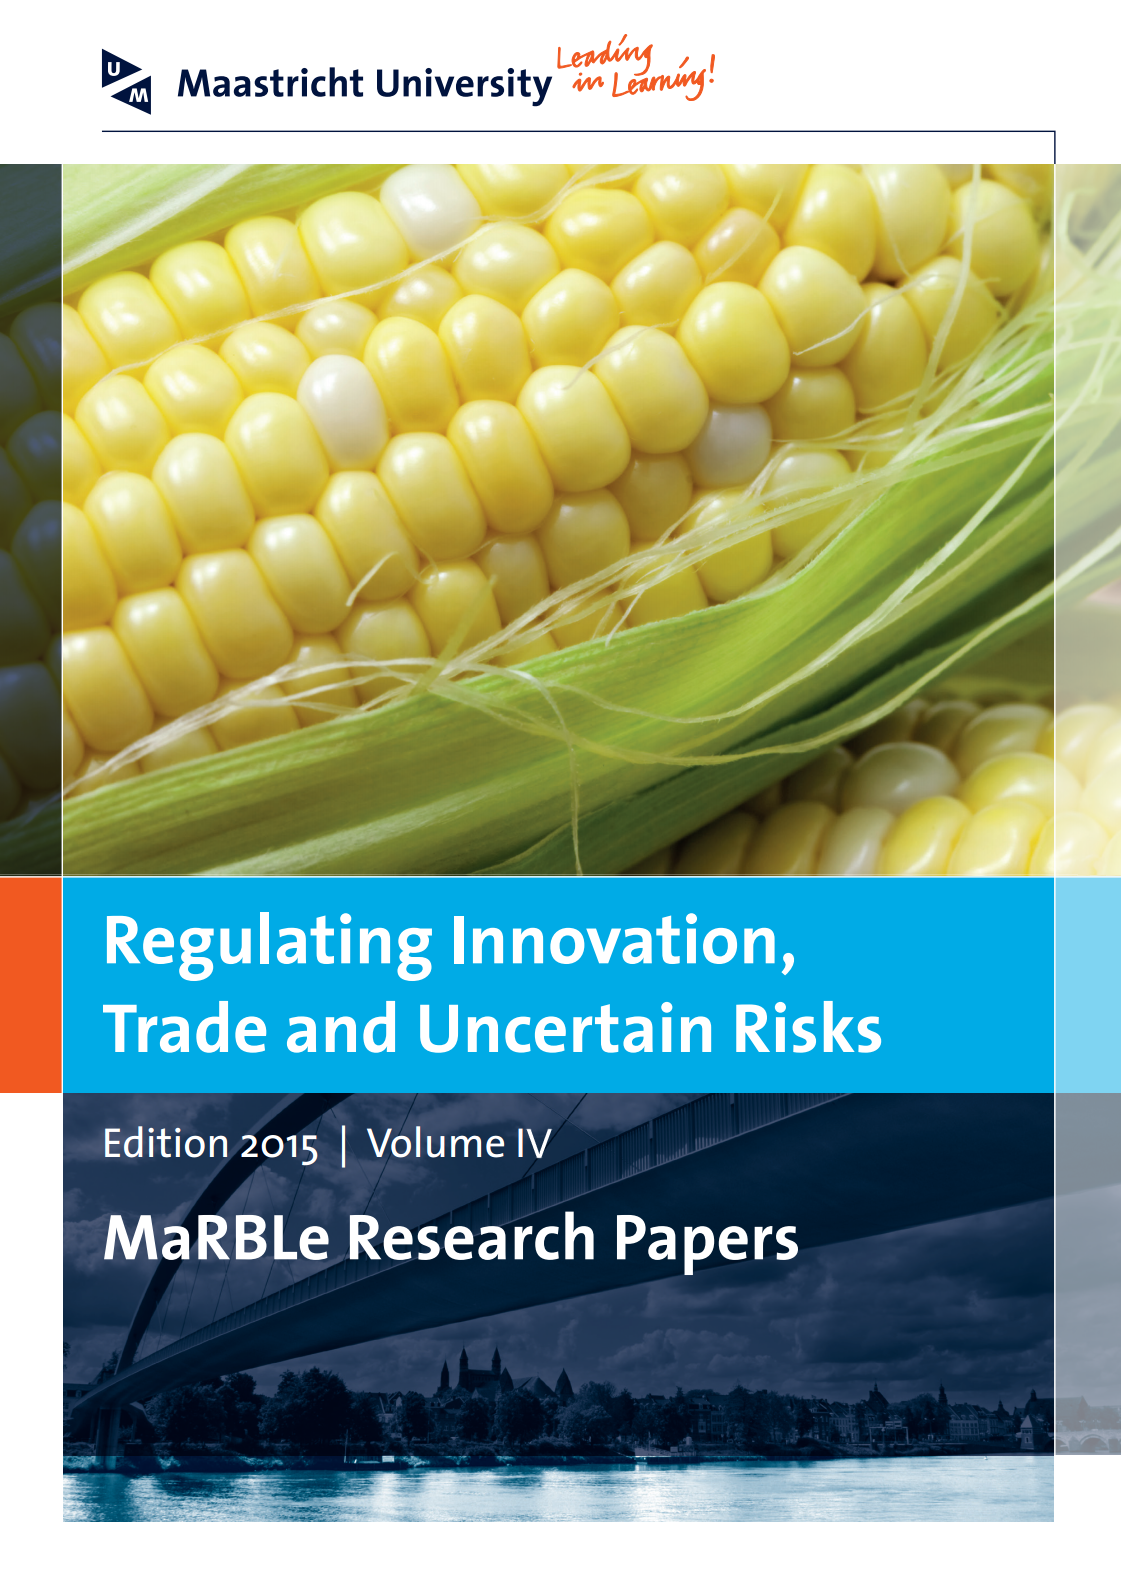 					View Vol. 4 (2015): Regulating Innovation, Trade and Uncertain Risks
				